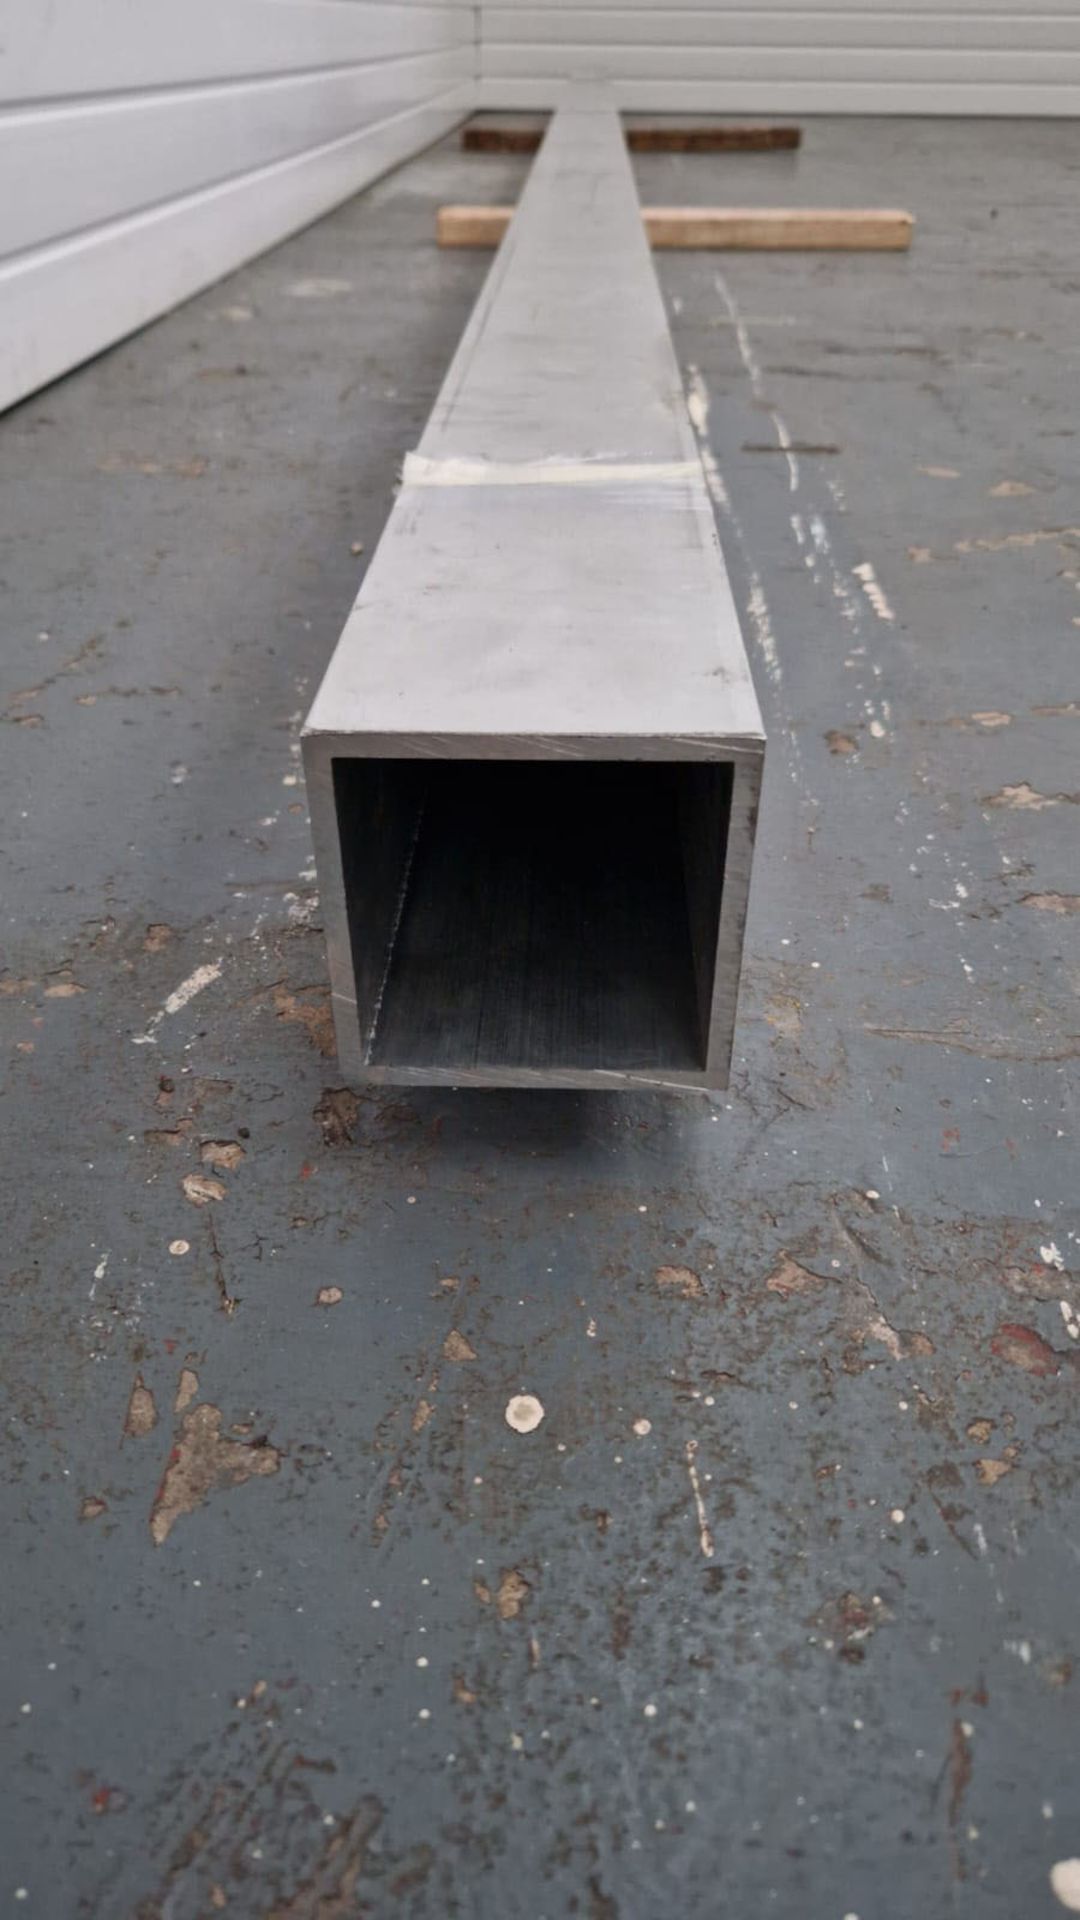 One Square Aluminium Tube. External Size 4" x 4". Thickness: 1/4". Length: 5000mm